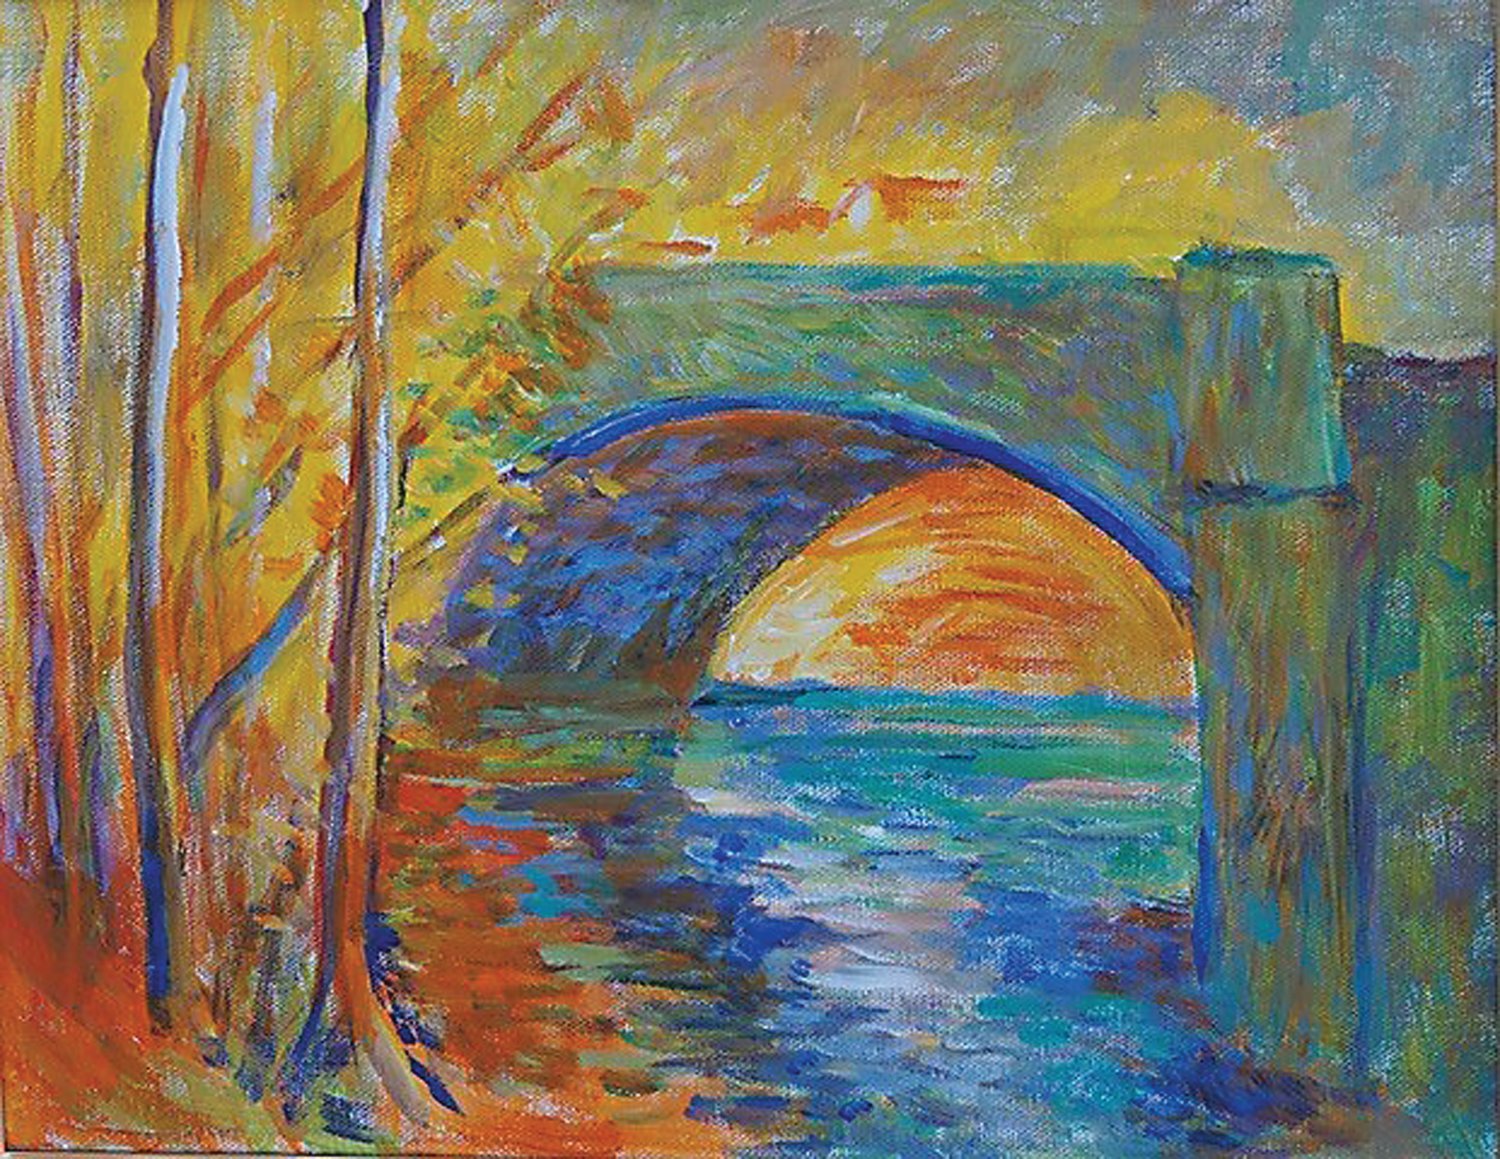 “Bridge over the Tohickon” is by Bill Jersey.